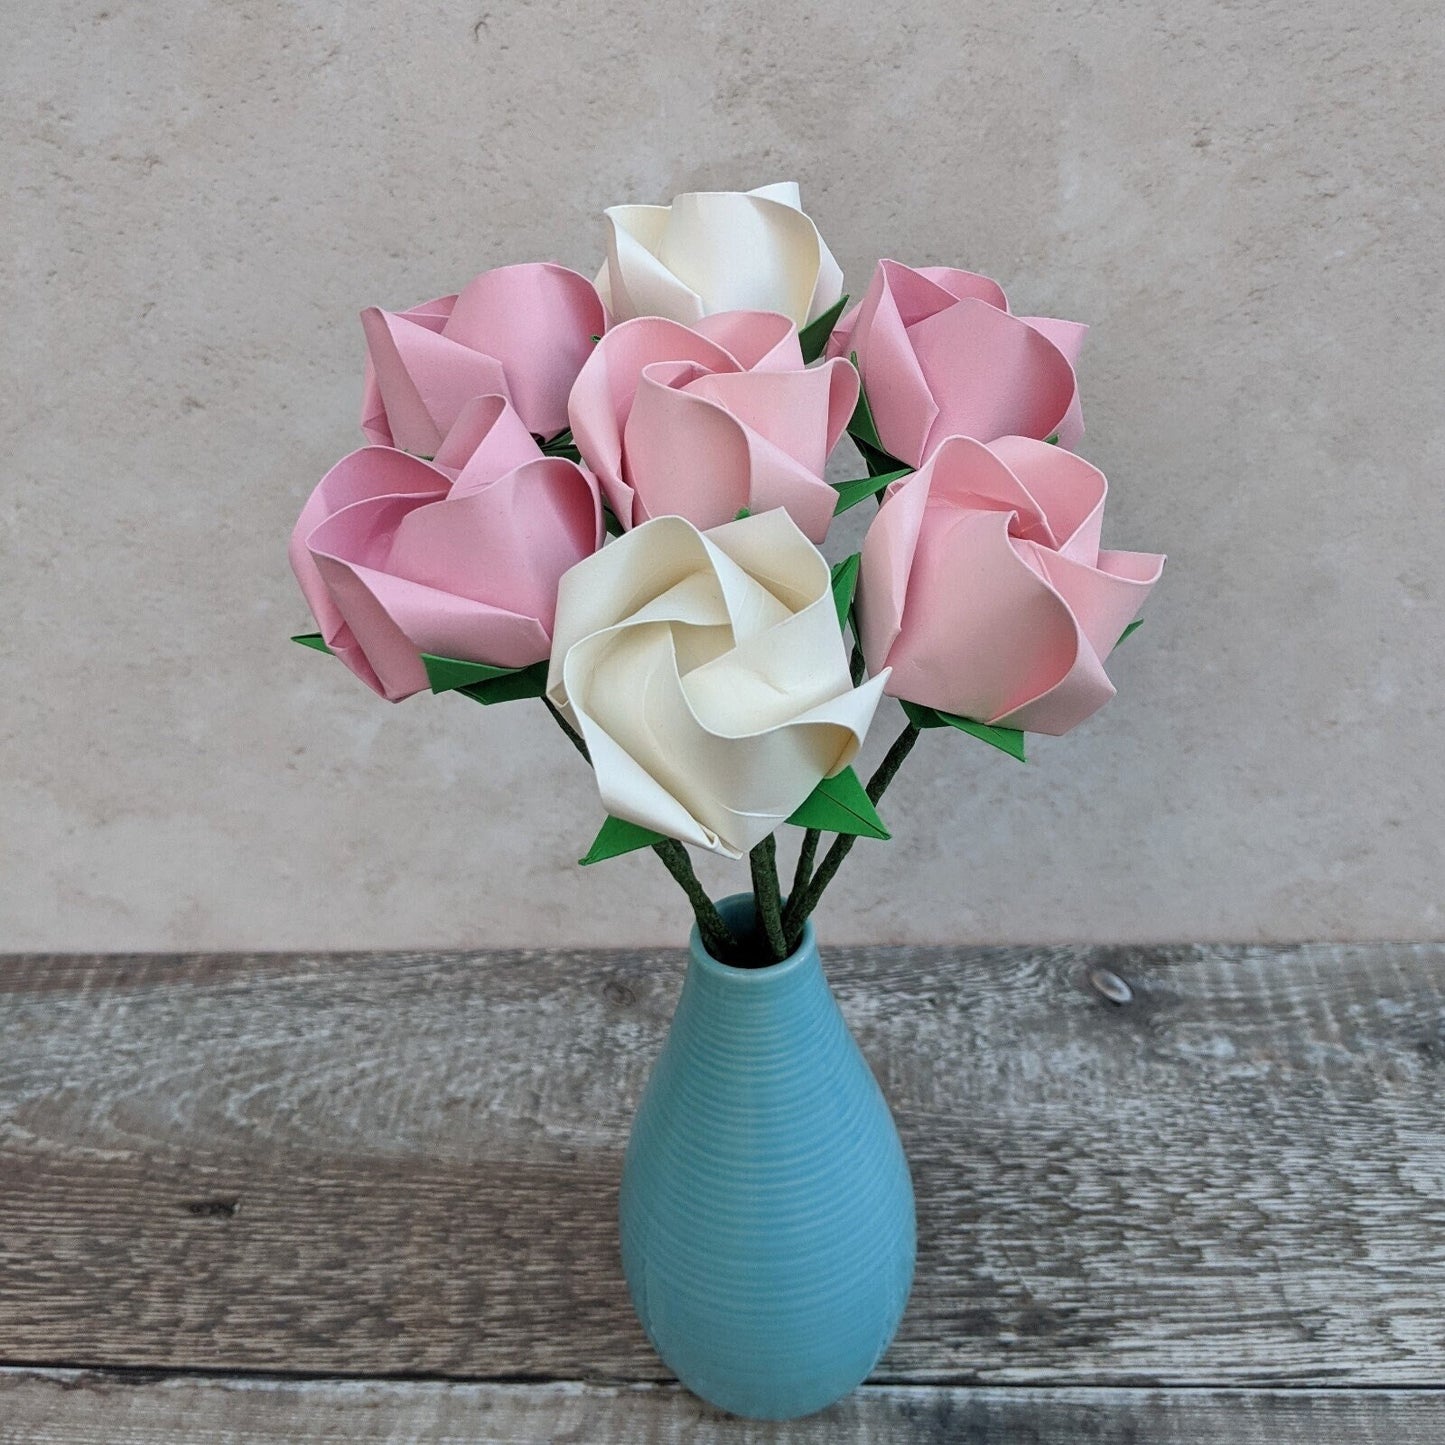 Origami roses bouquet, romantic paper flower gift